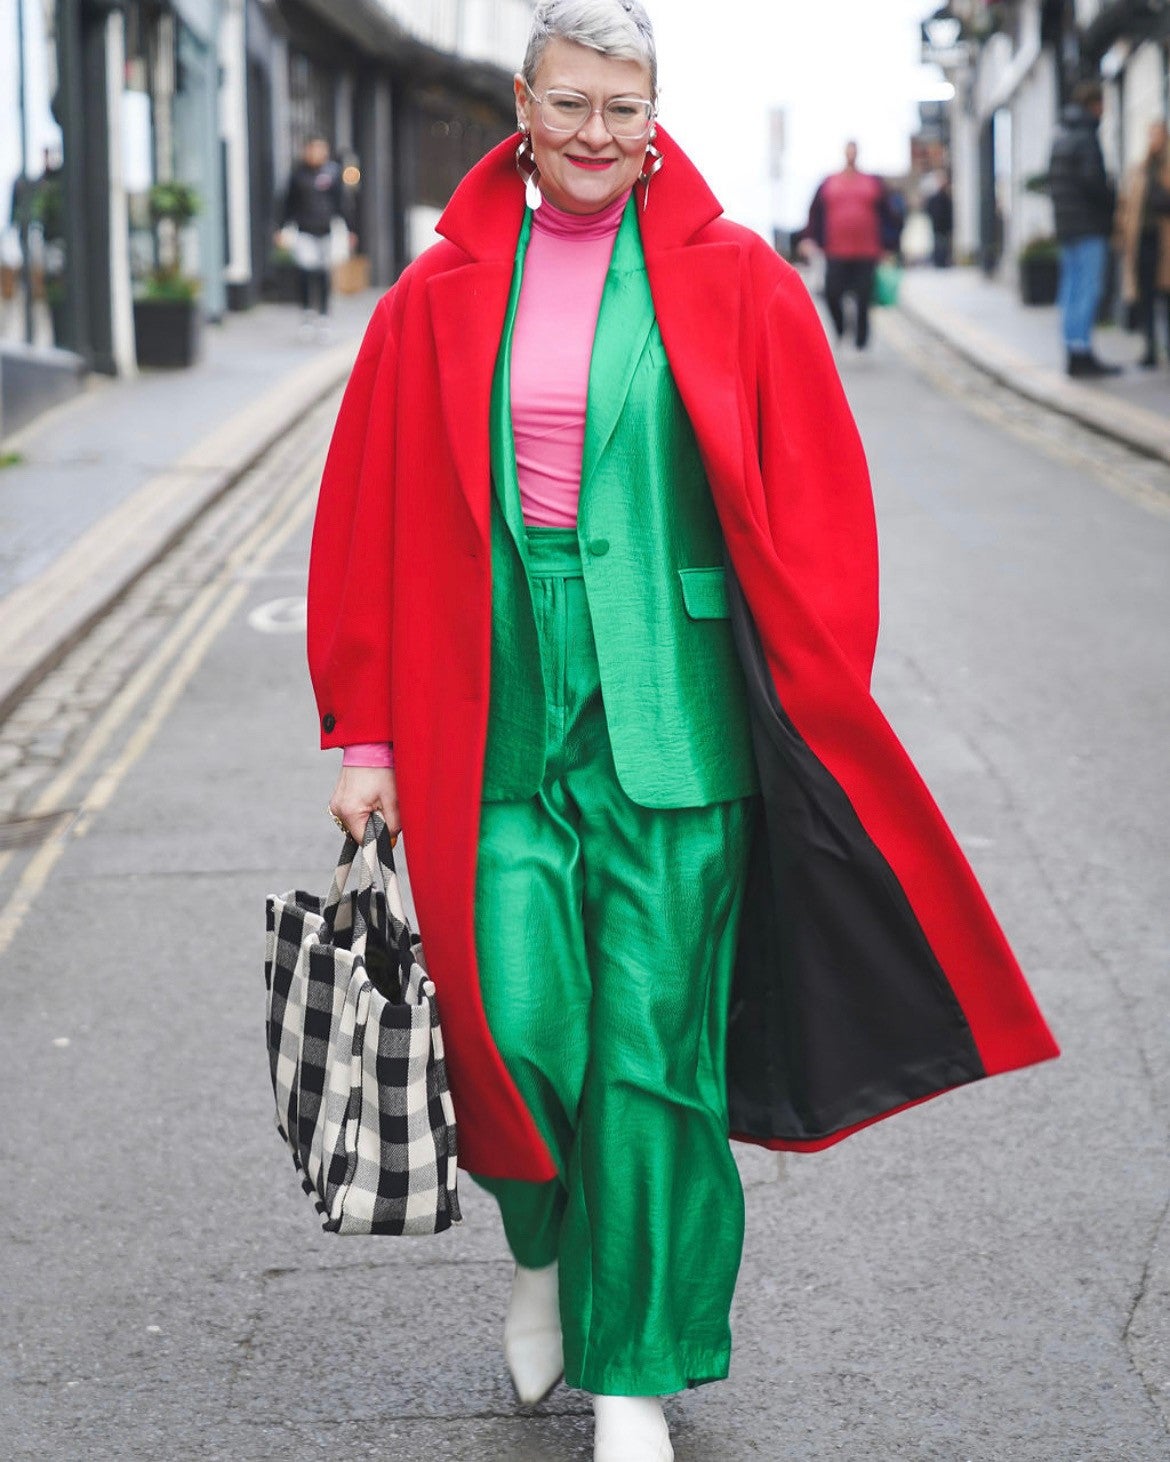 Abbey models a vibrant green suit with a bright red coat